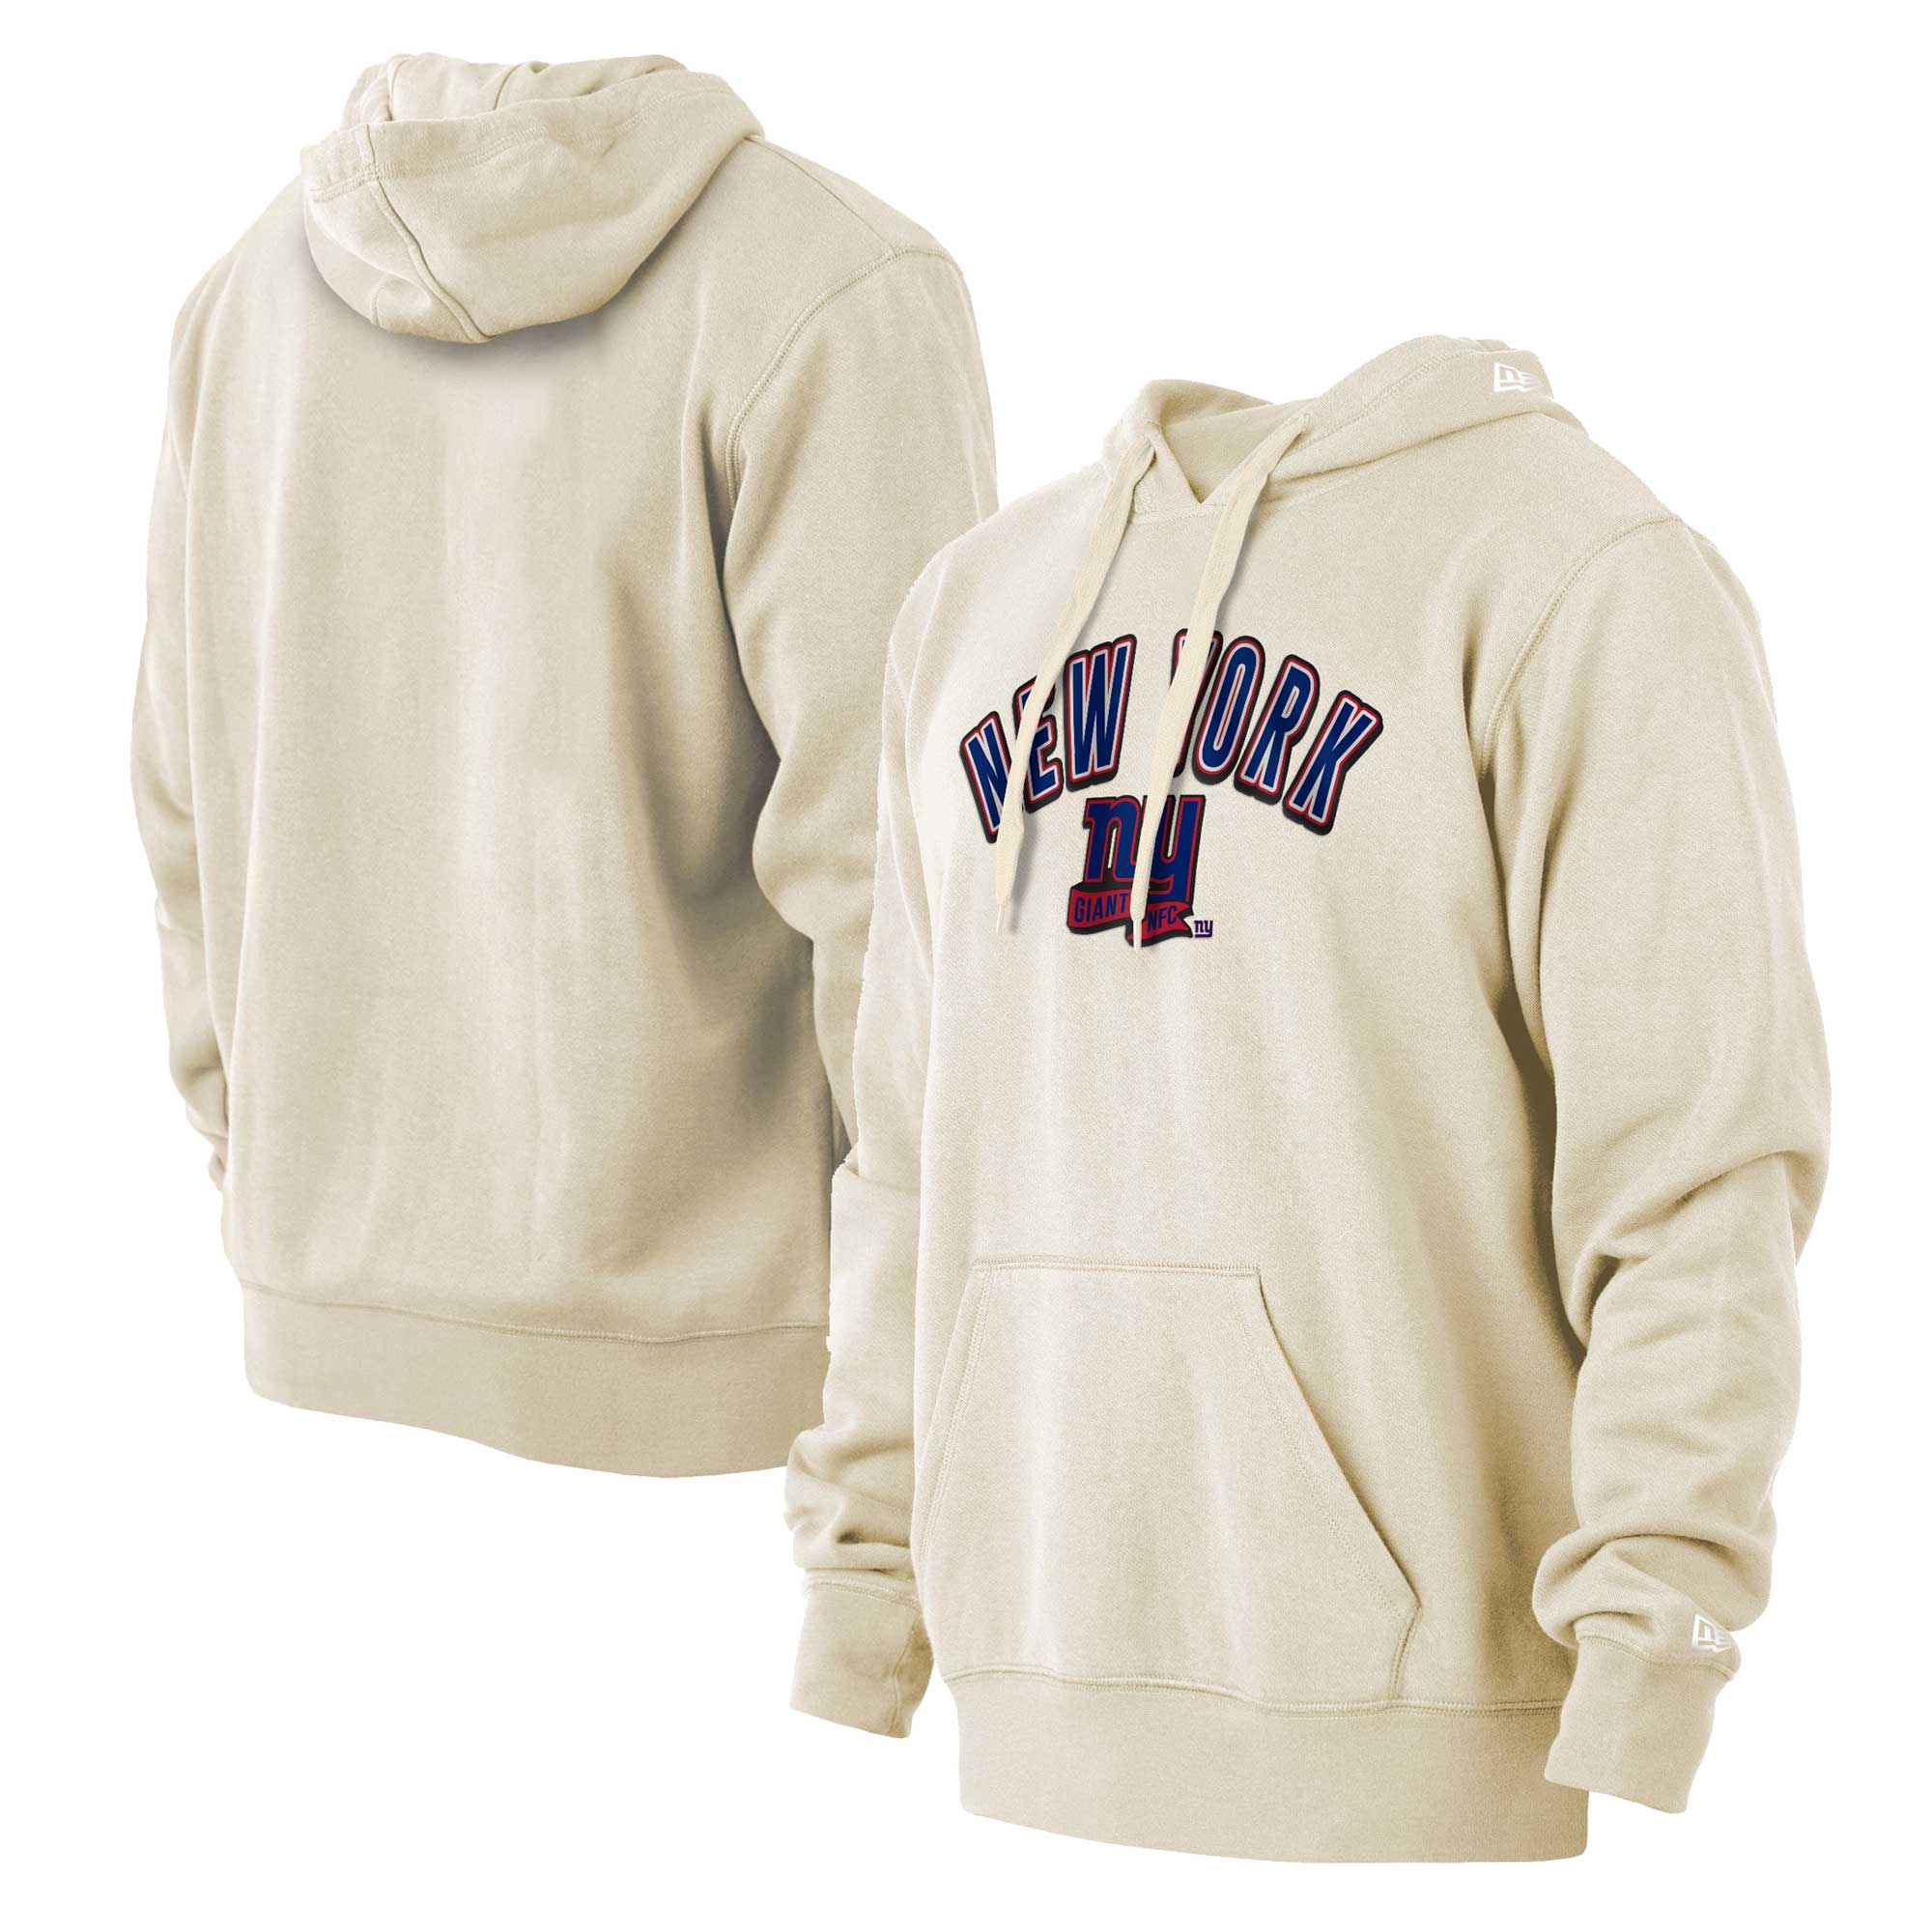 Youth Red New York Giants Retro Colorblock Pullover Hoodie